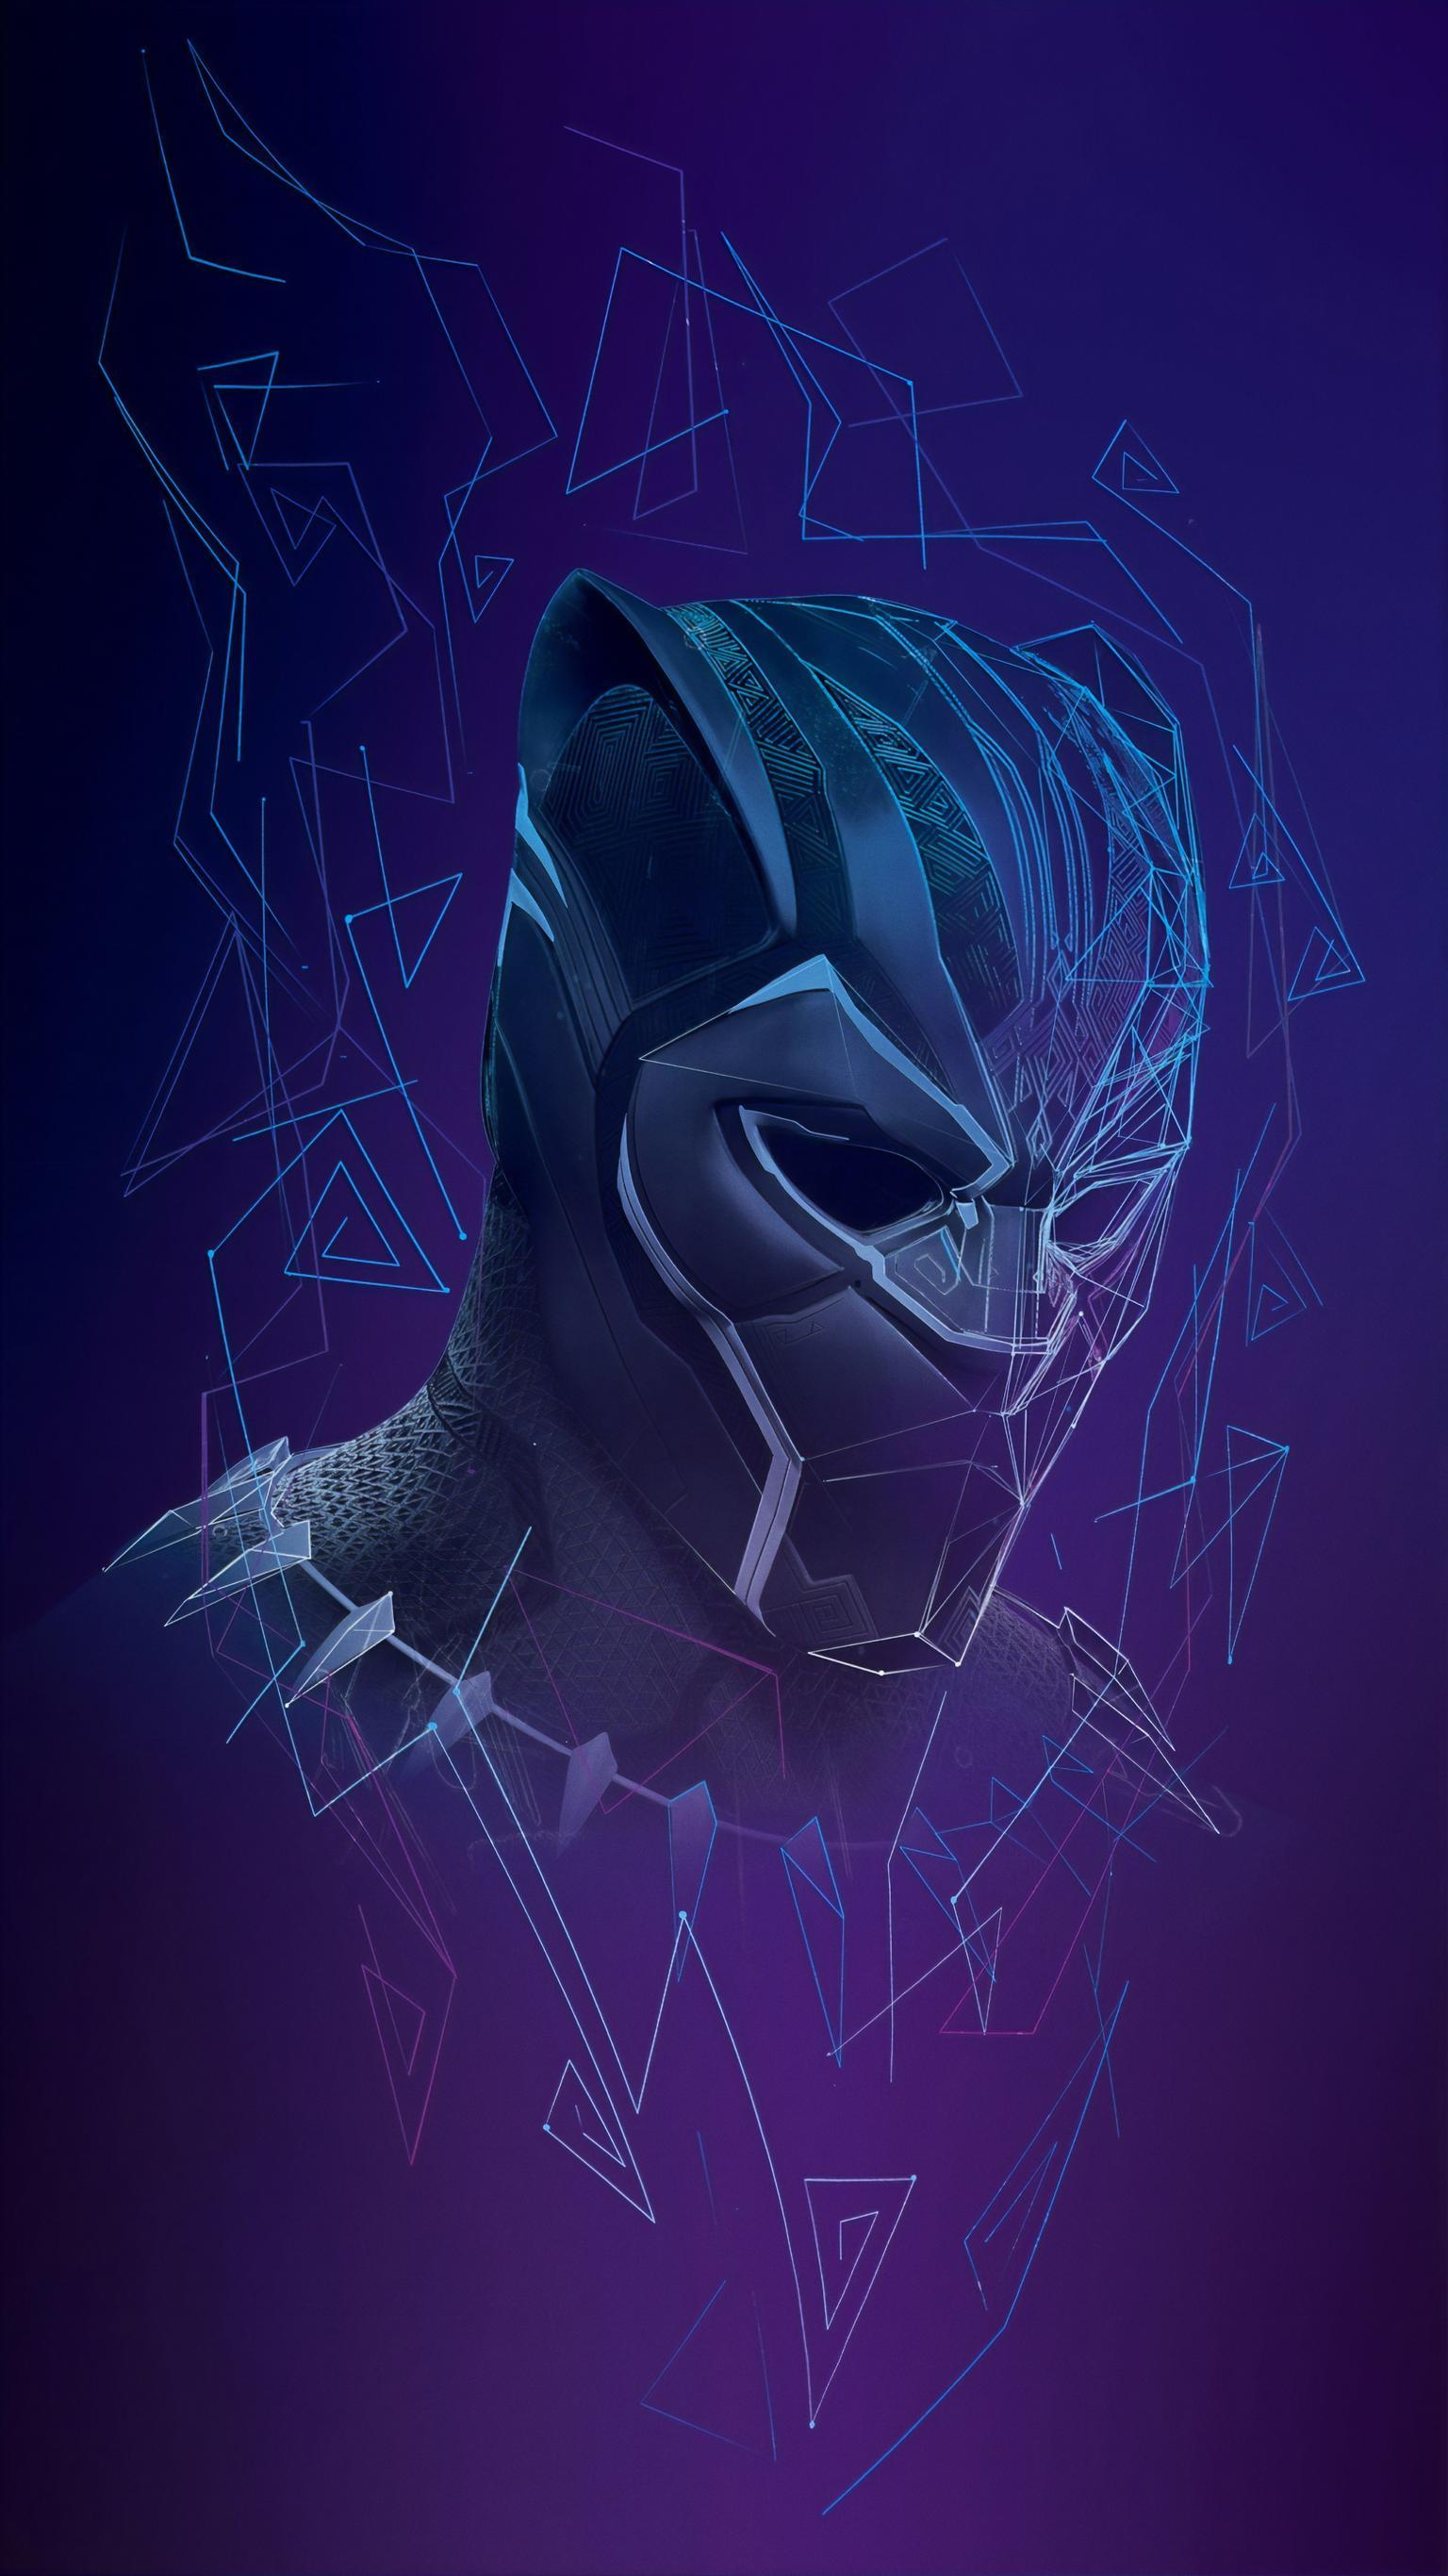 4K Black Panther Wallpaper HD:Amazon.com.au:Appstore for Android